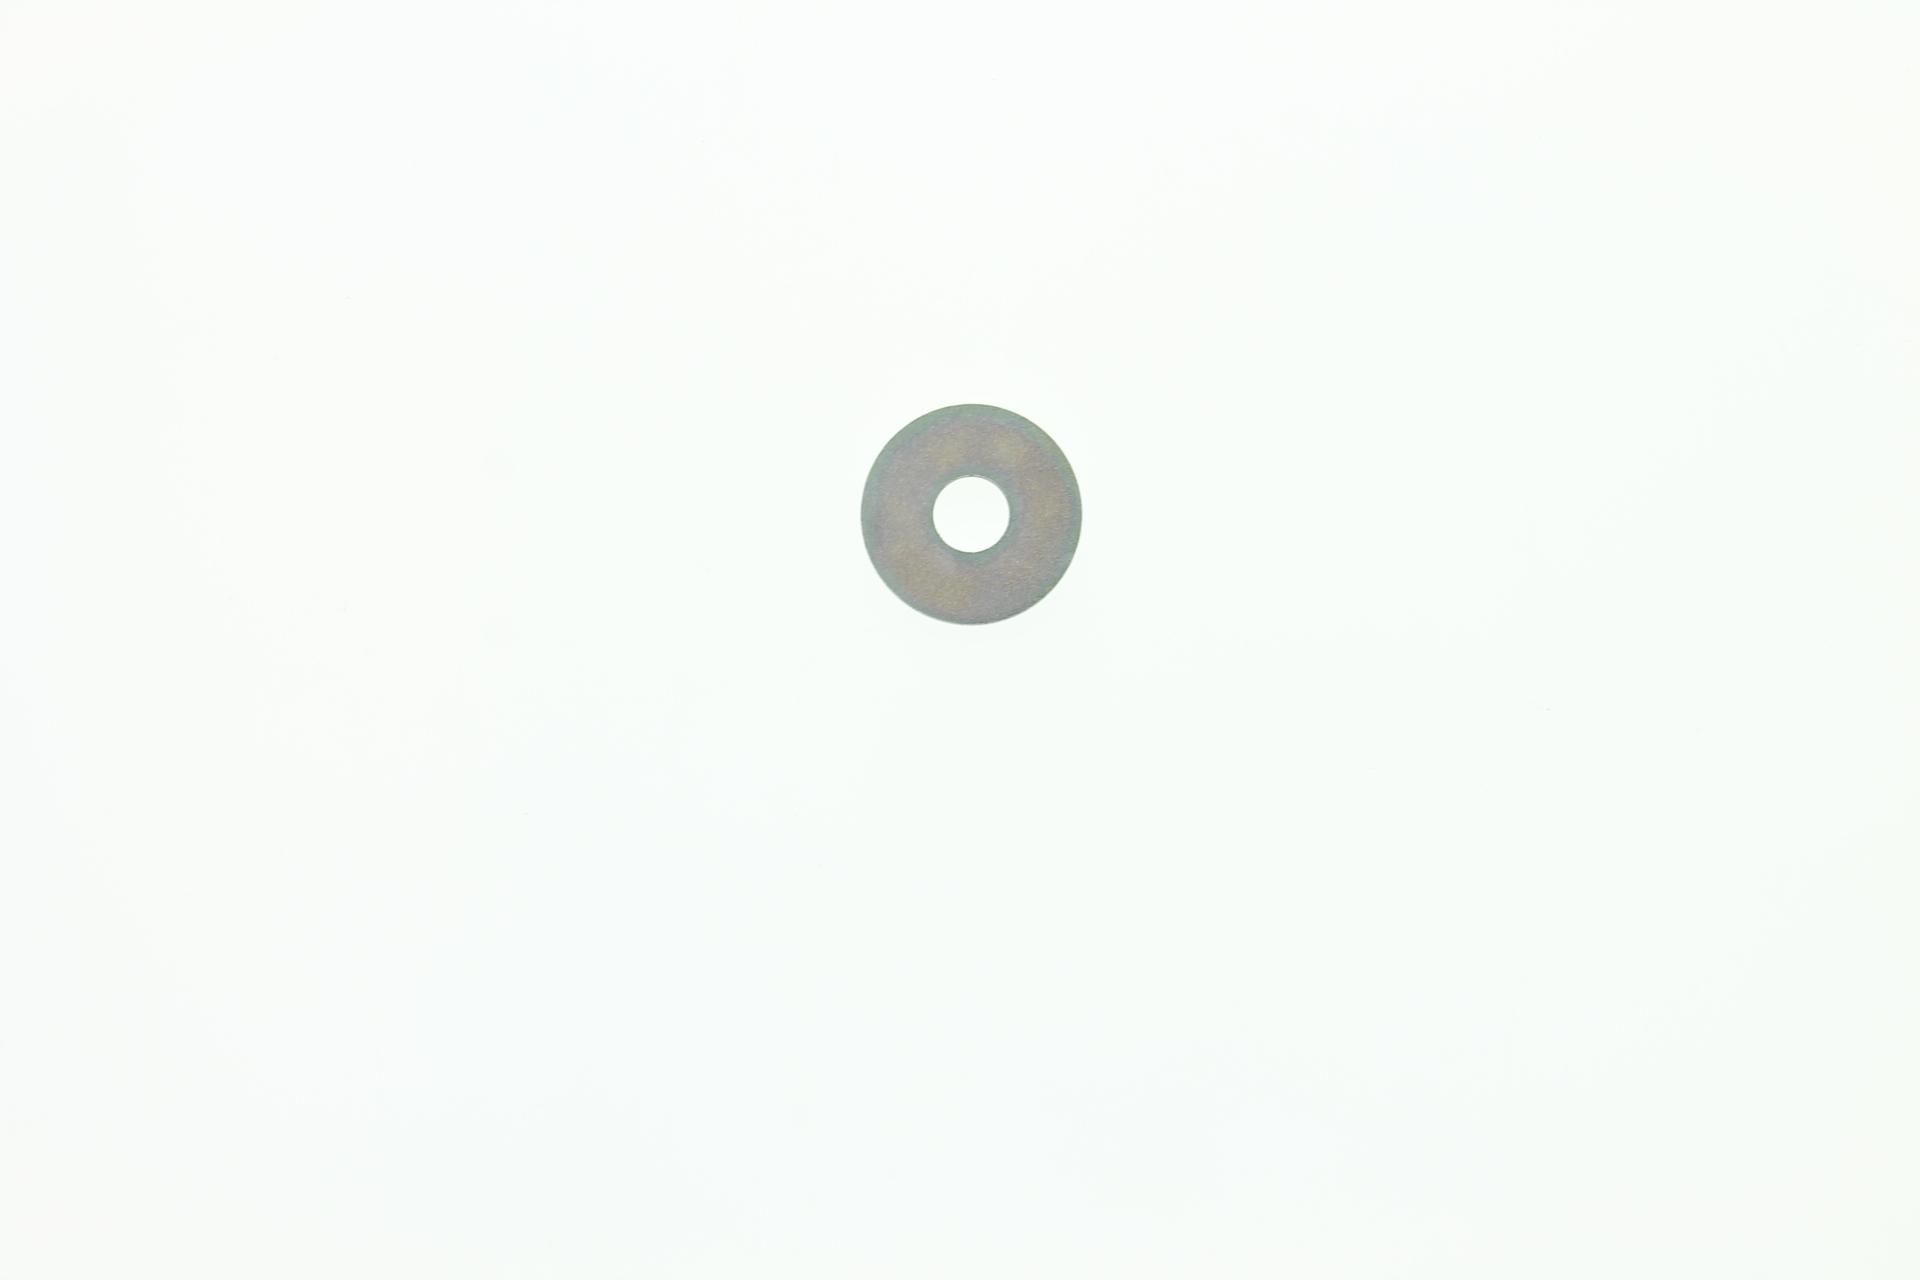 90201-06063-00 Superseded by 90201-06095-00 - WASHER, PLATE